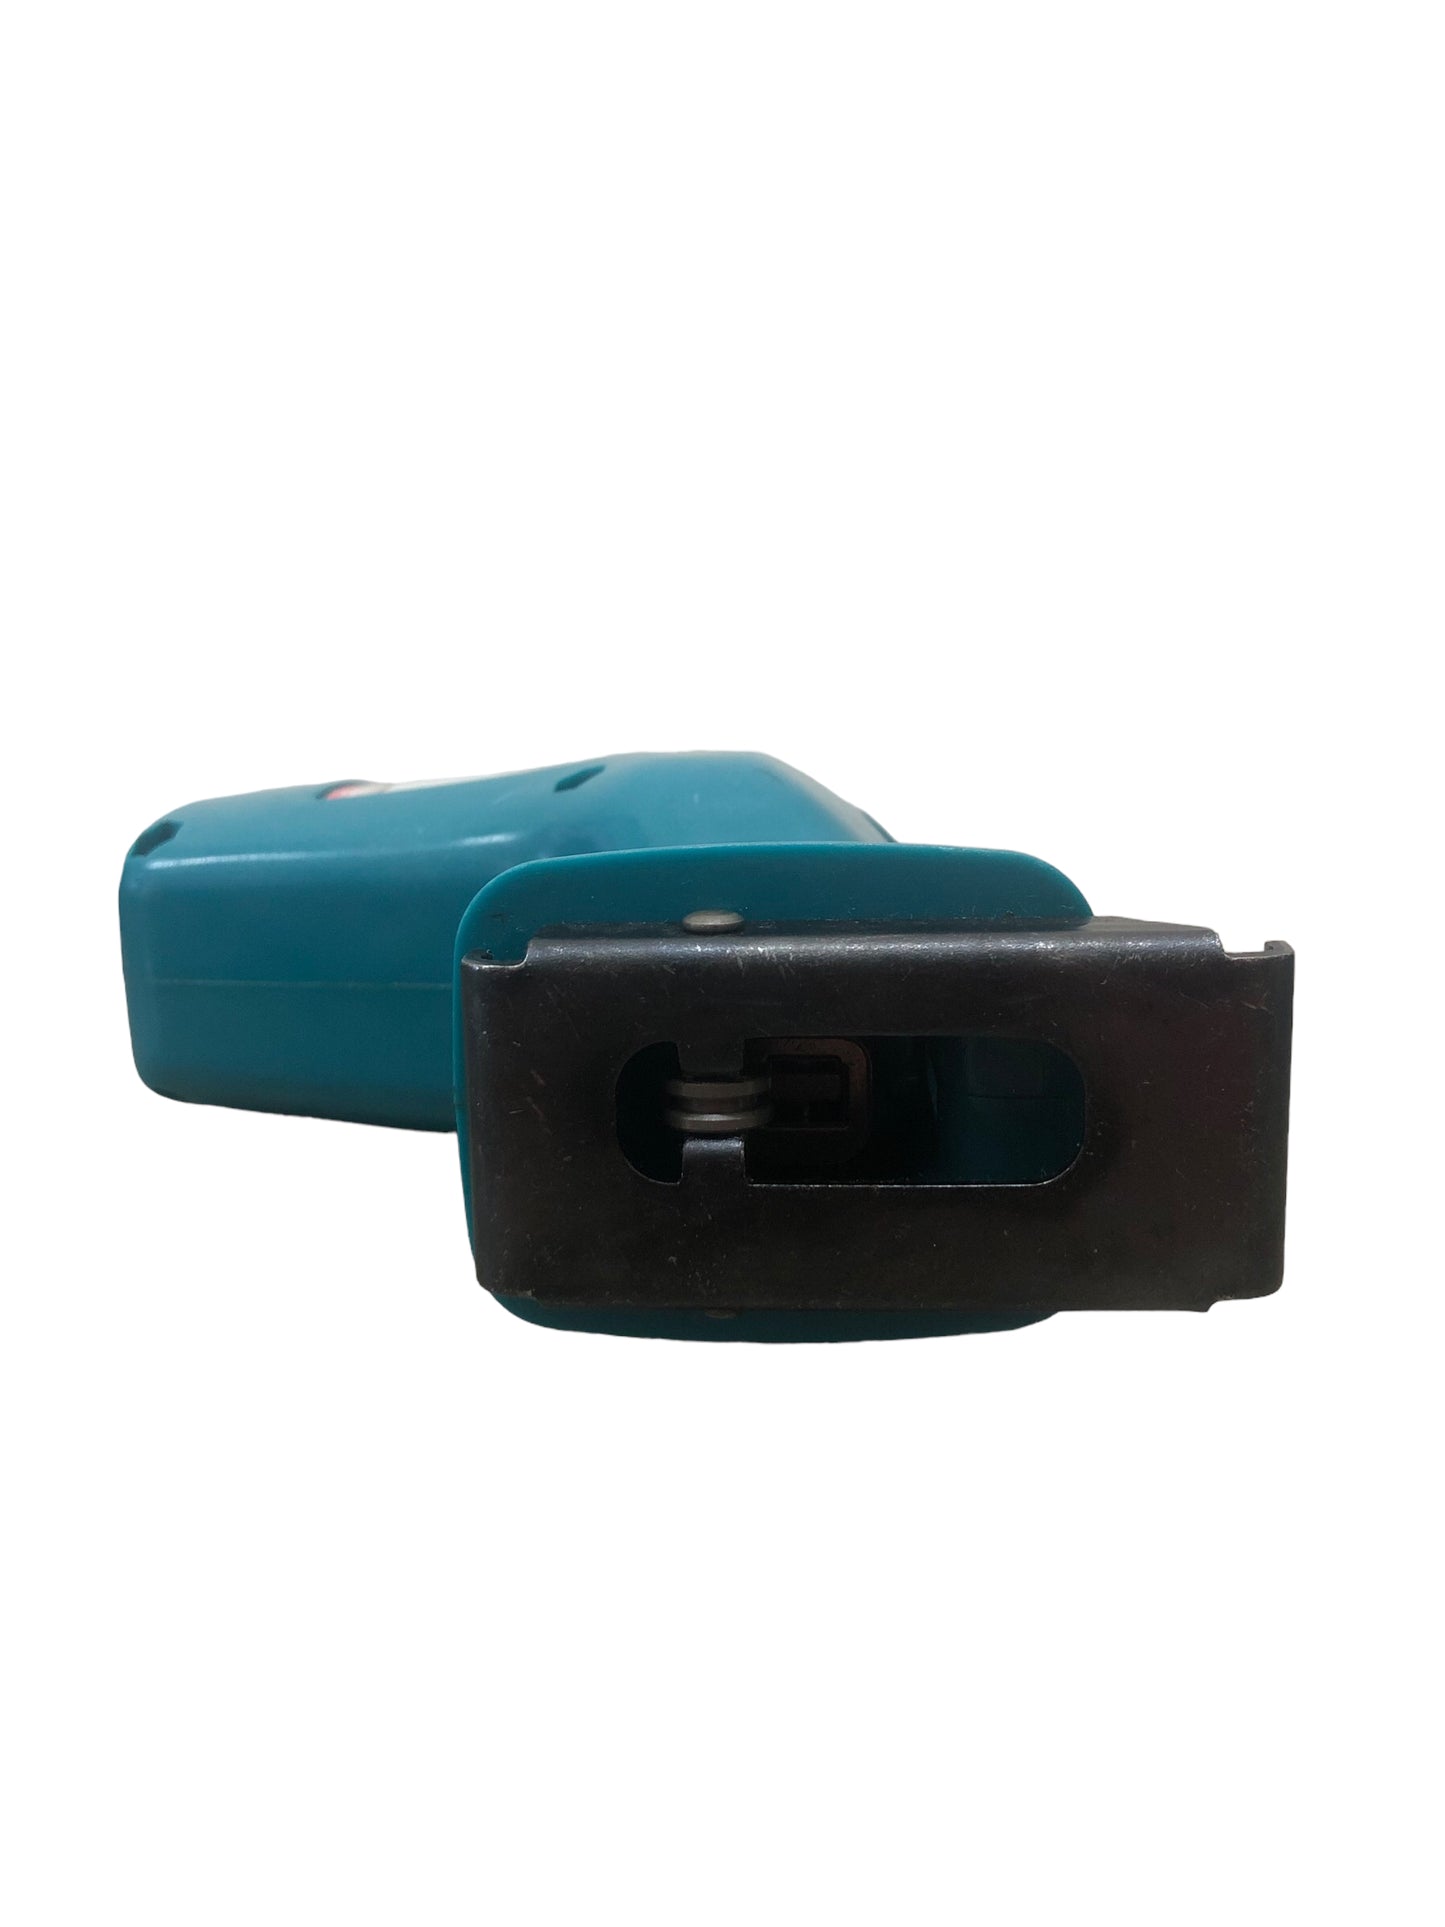 Makita 4390D Reciprocating Saw Tool with Charger & Battery